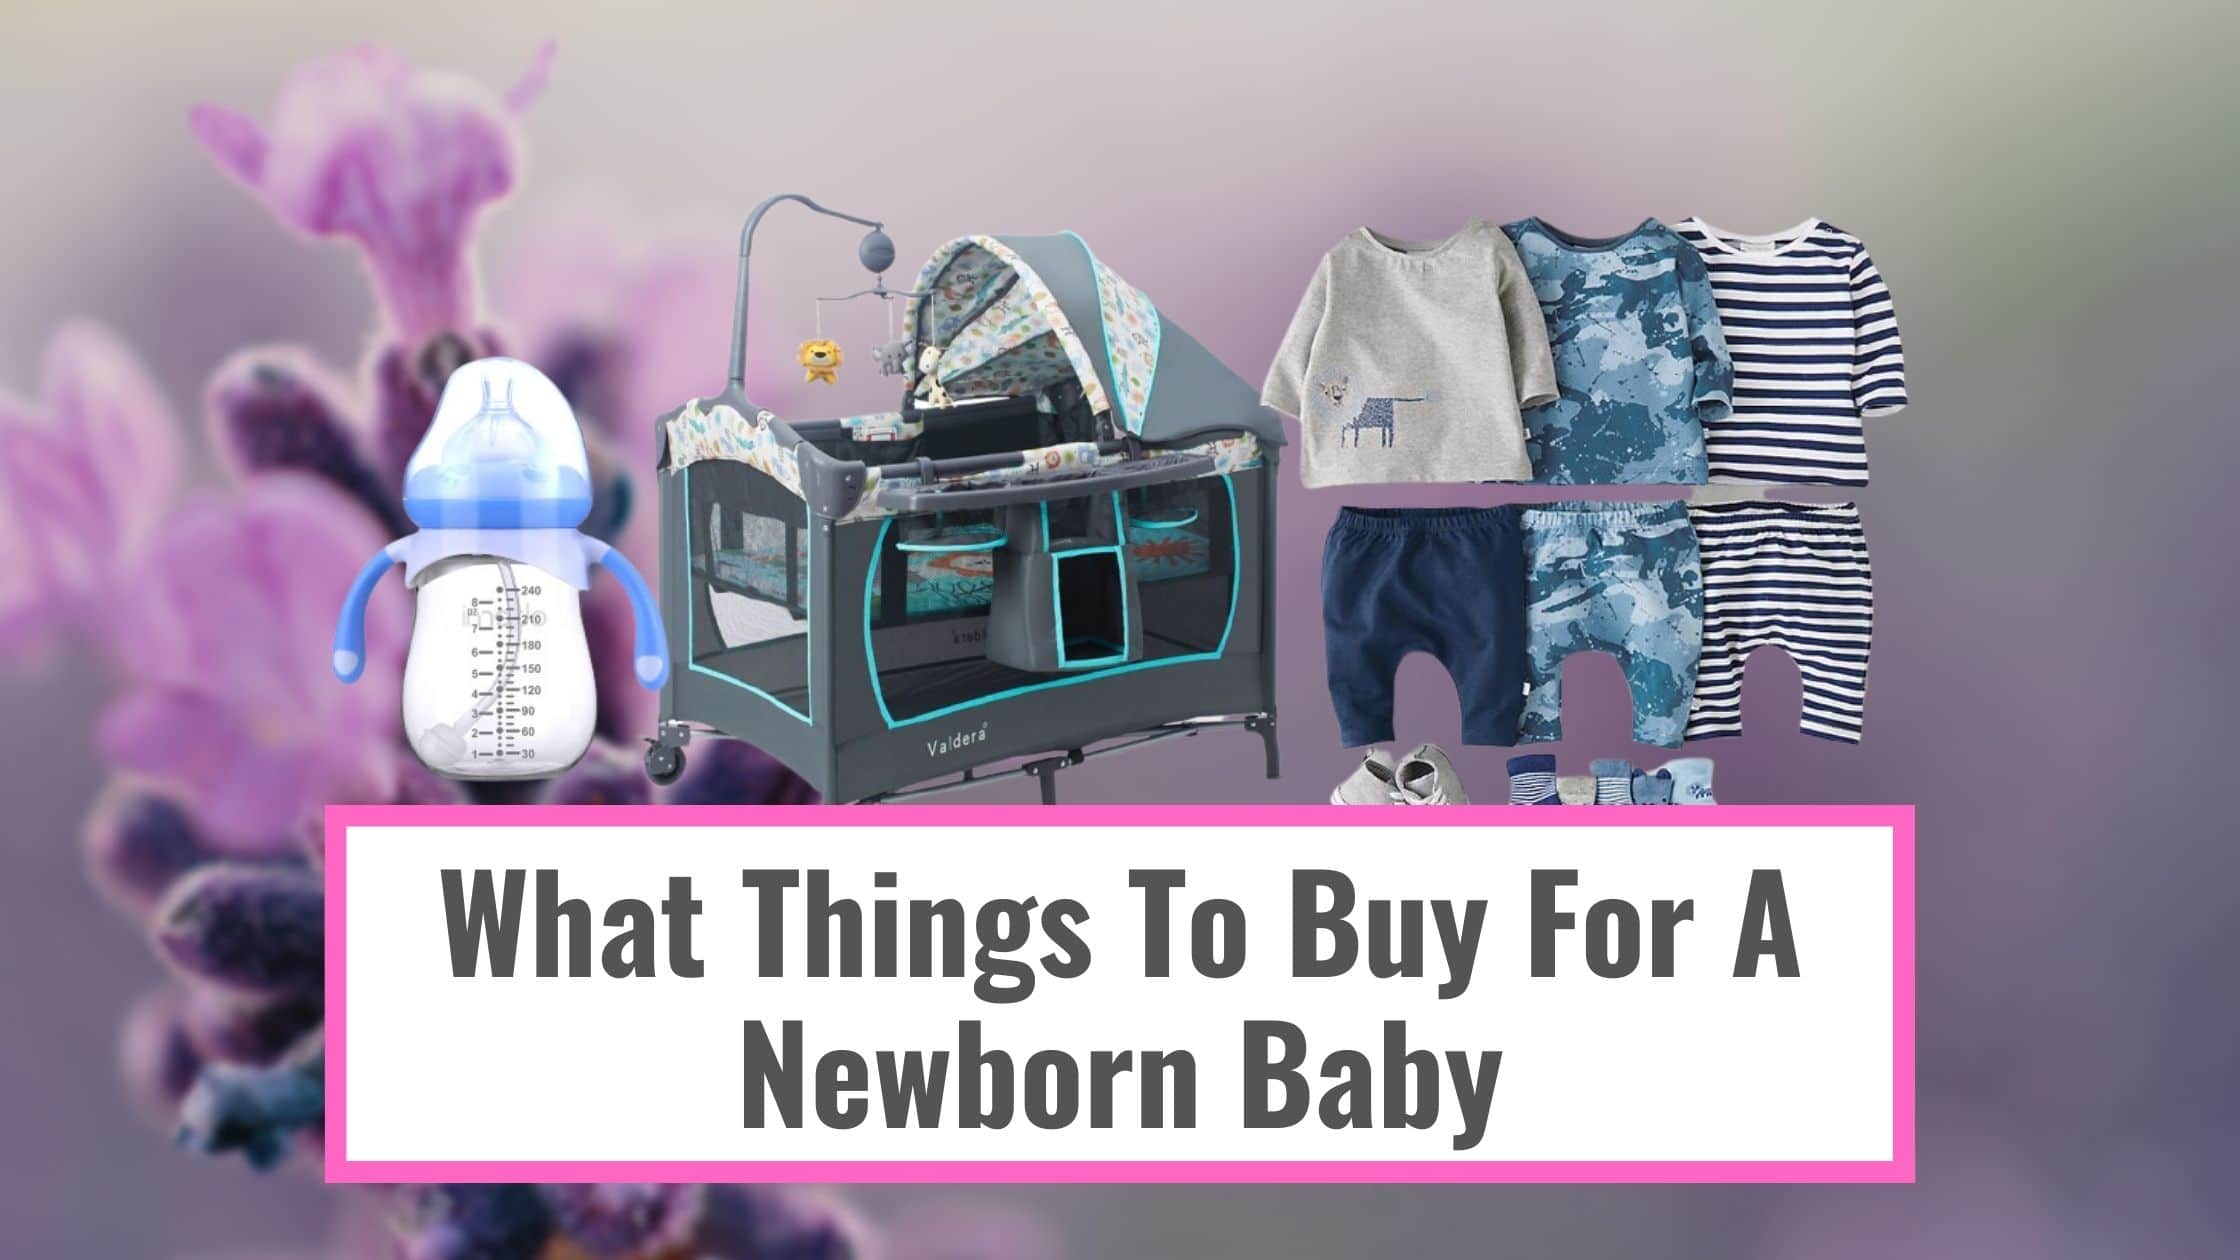 What Things To Buy For A Newborn Baby